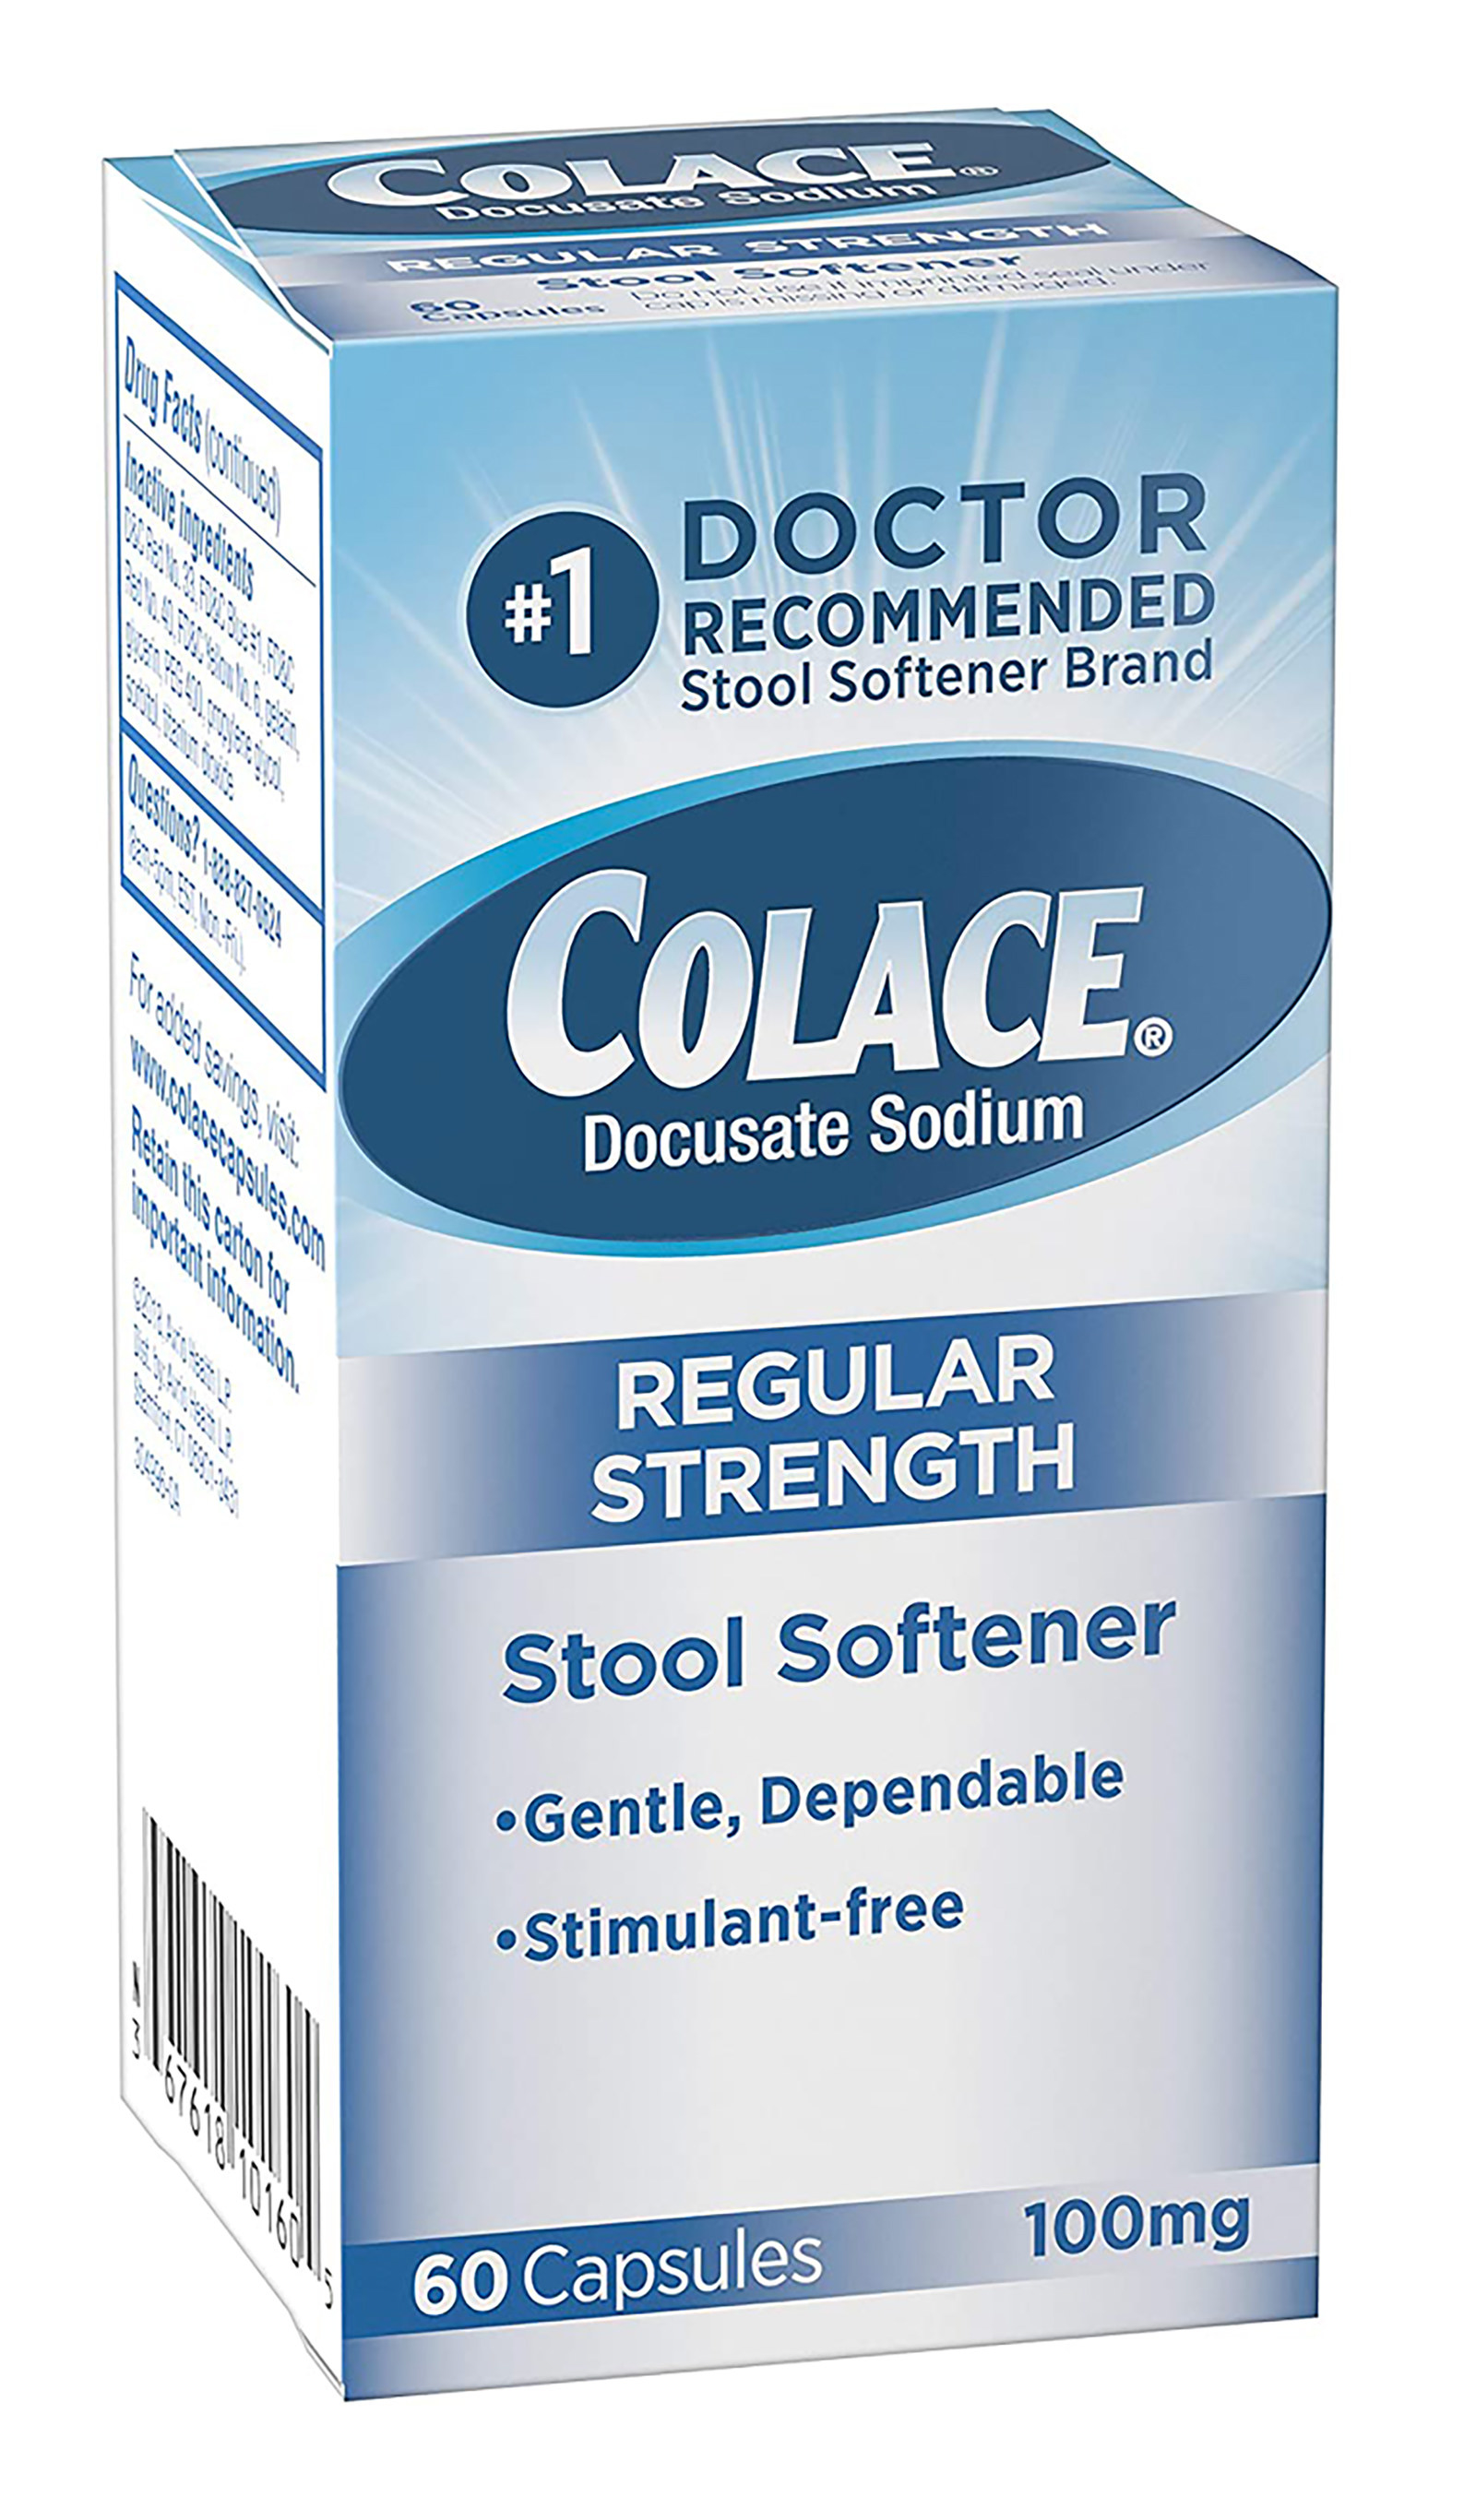 Image of Colace stool softener 